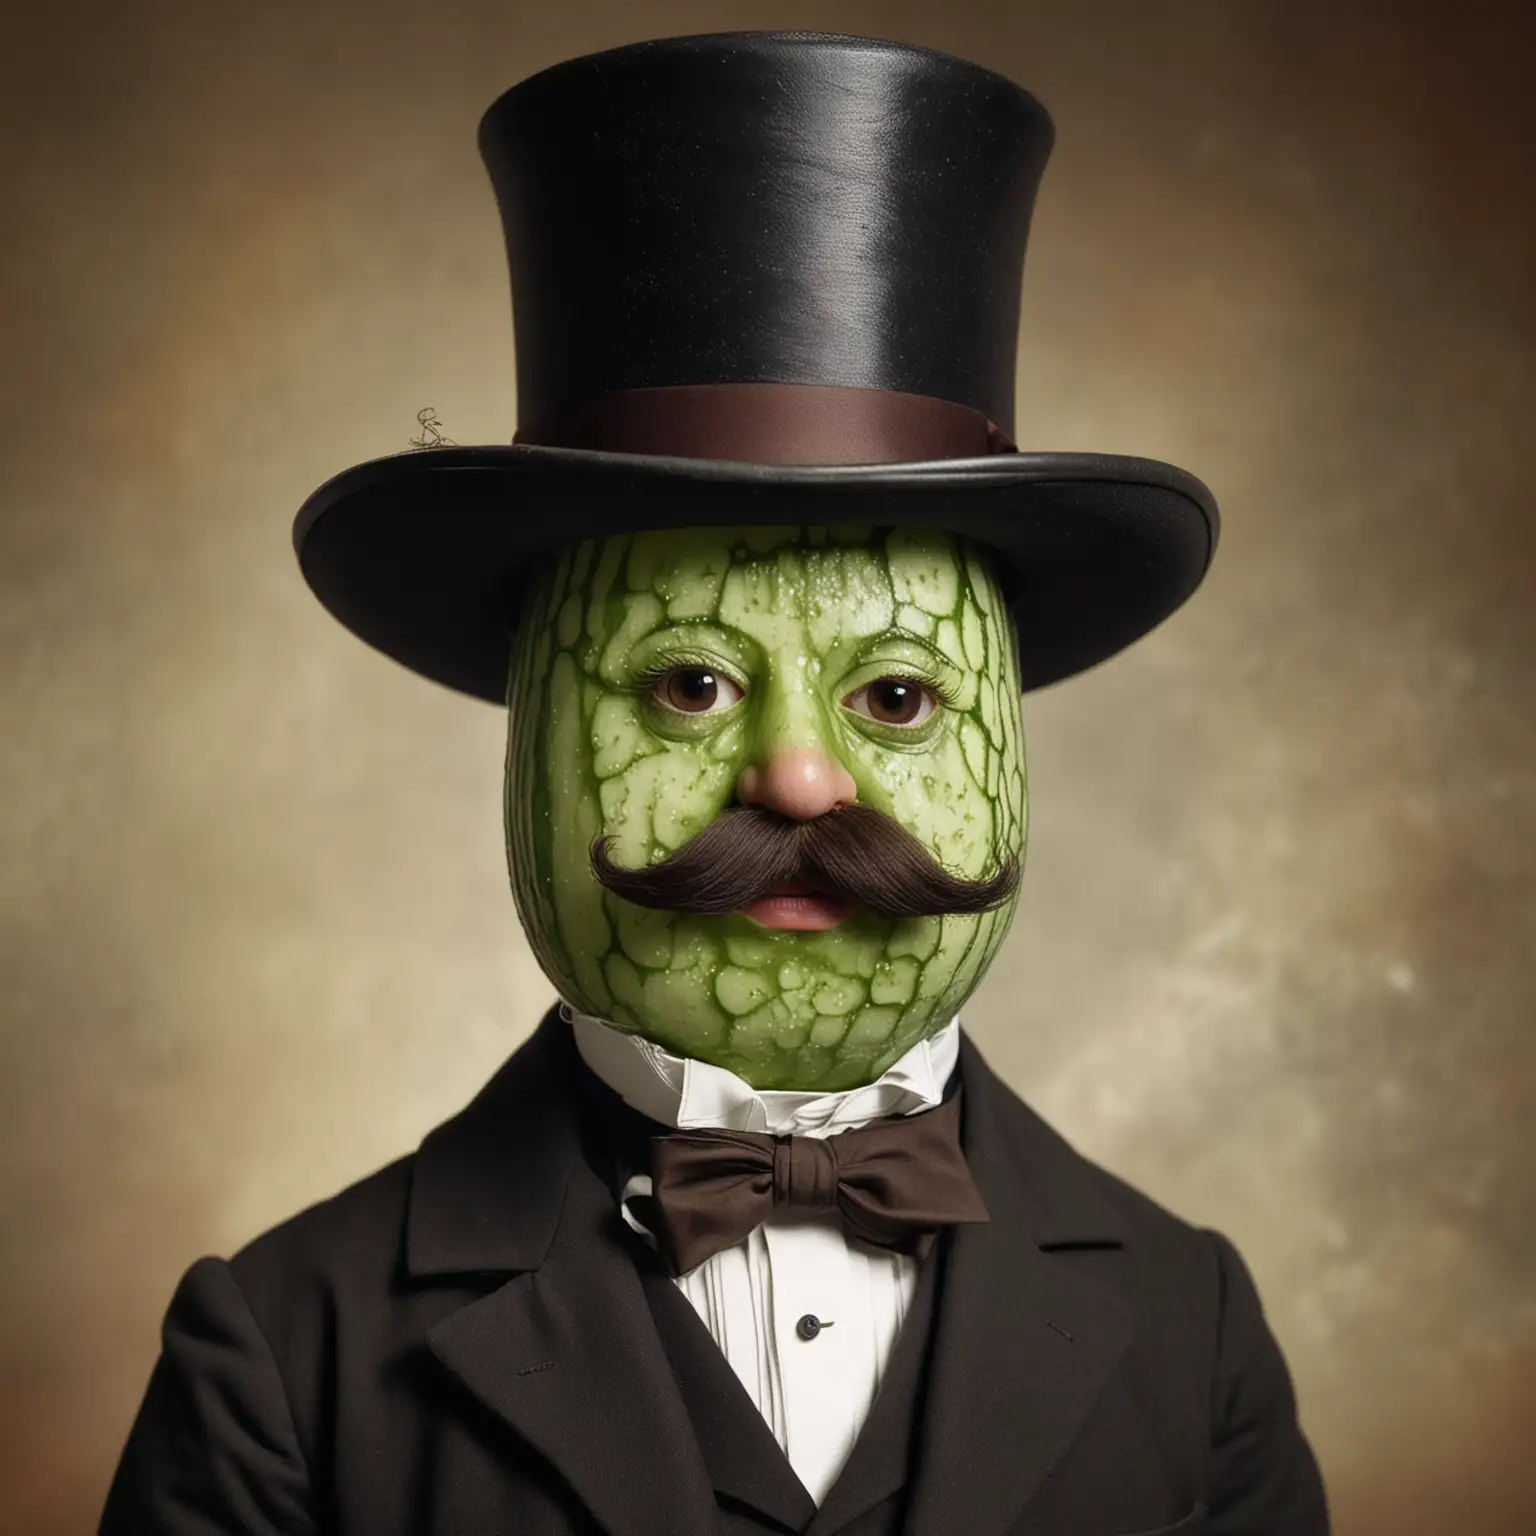 19th Century Cucumber Slice in Mustache and Top Hat with a Suit